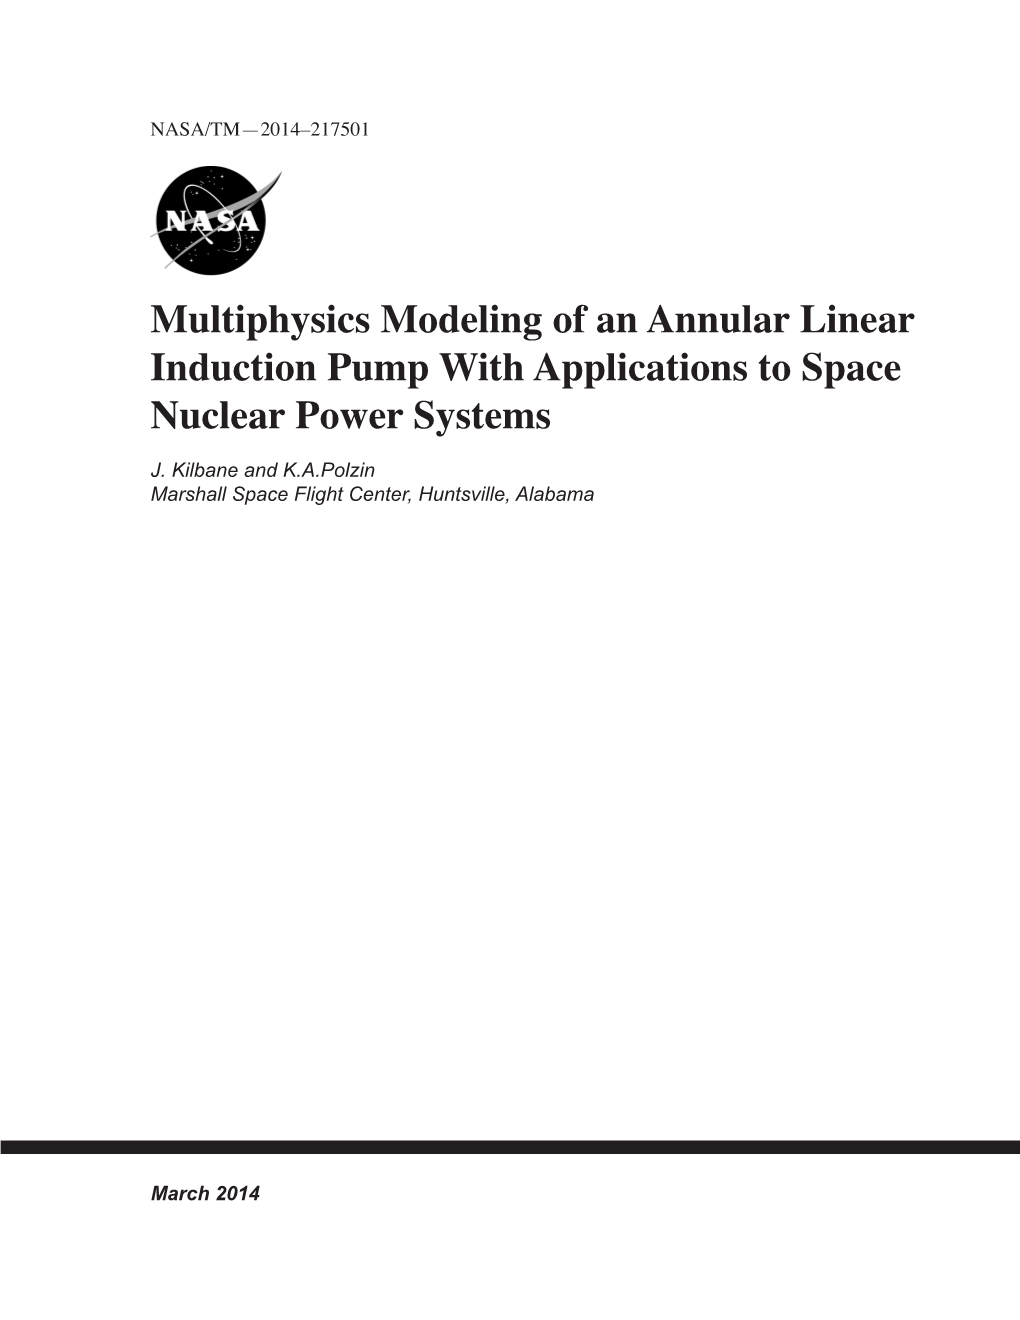 Multiphysics Modeling of an Annular Linear Induction Pump with Applications to Space Nuclear Power Systems J